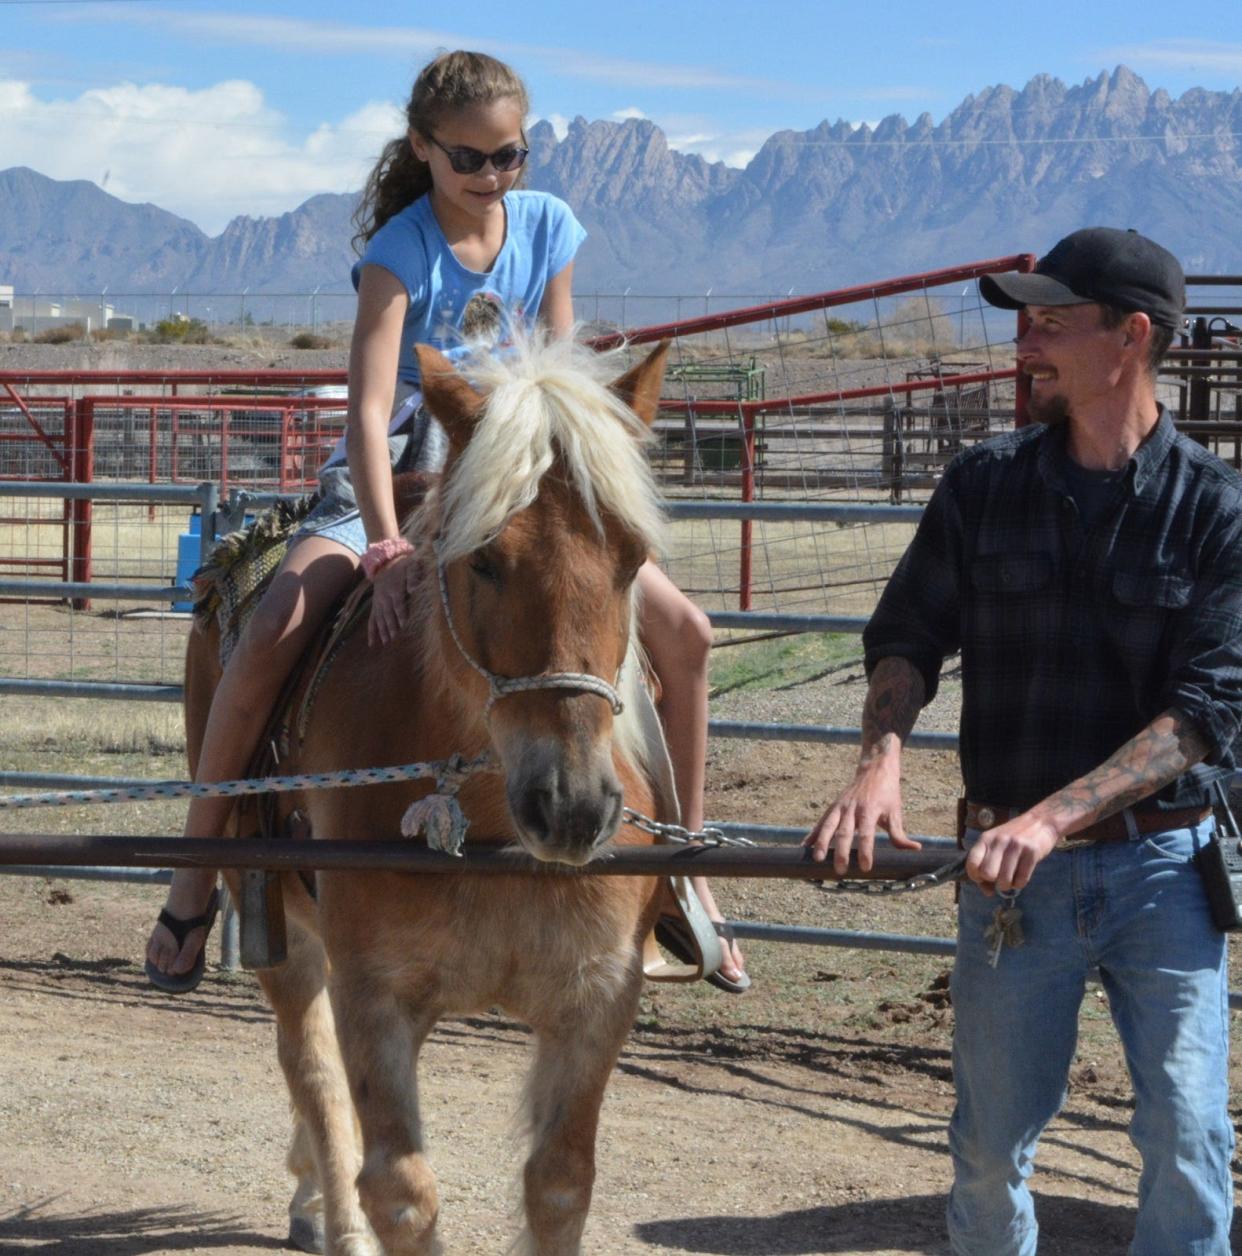 Cowboy Days will also feature pony rides from 9-11 a.m. and 1-3 p.m. on March 4 at the New Mexico Farm & Ranch Heritage Museum.